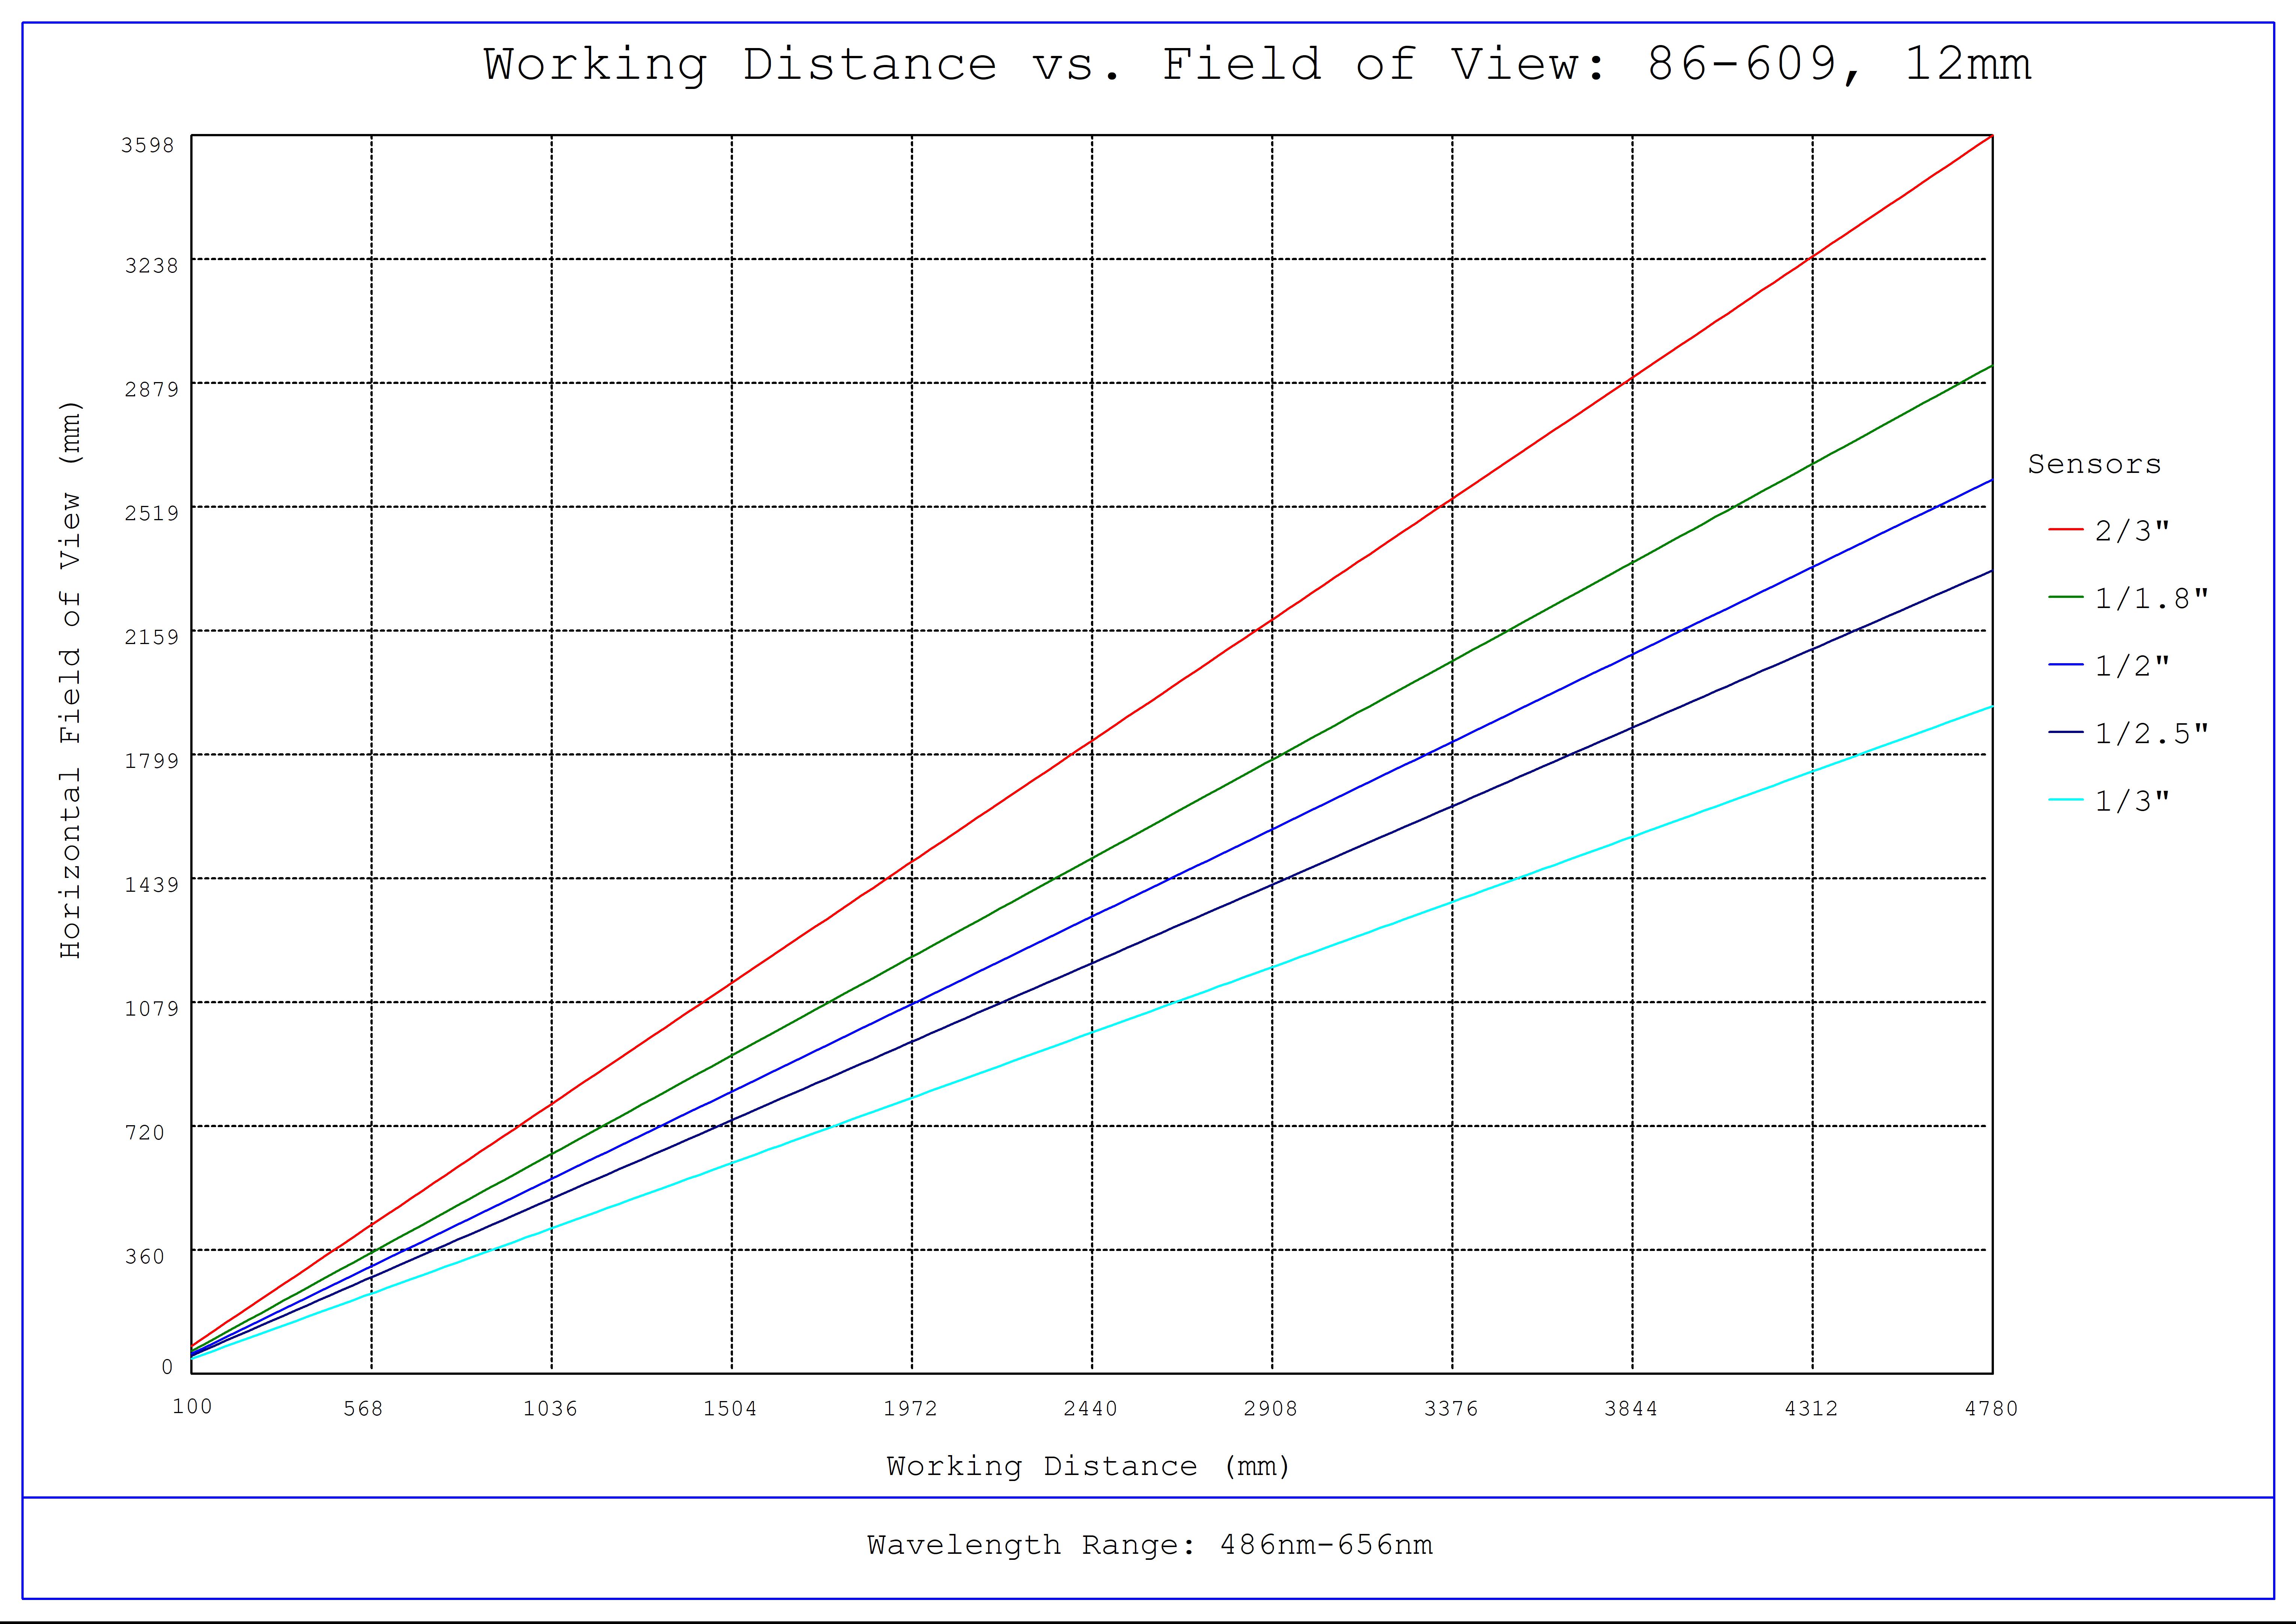 #86-609, 12mm, f/4 Ci Series Fixed Focal Length Lens, Working Distance versus Field of View Plot